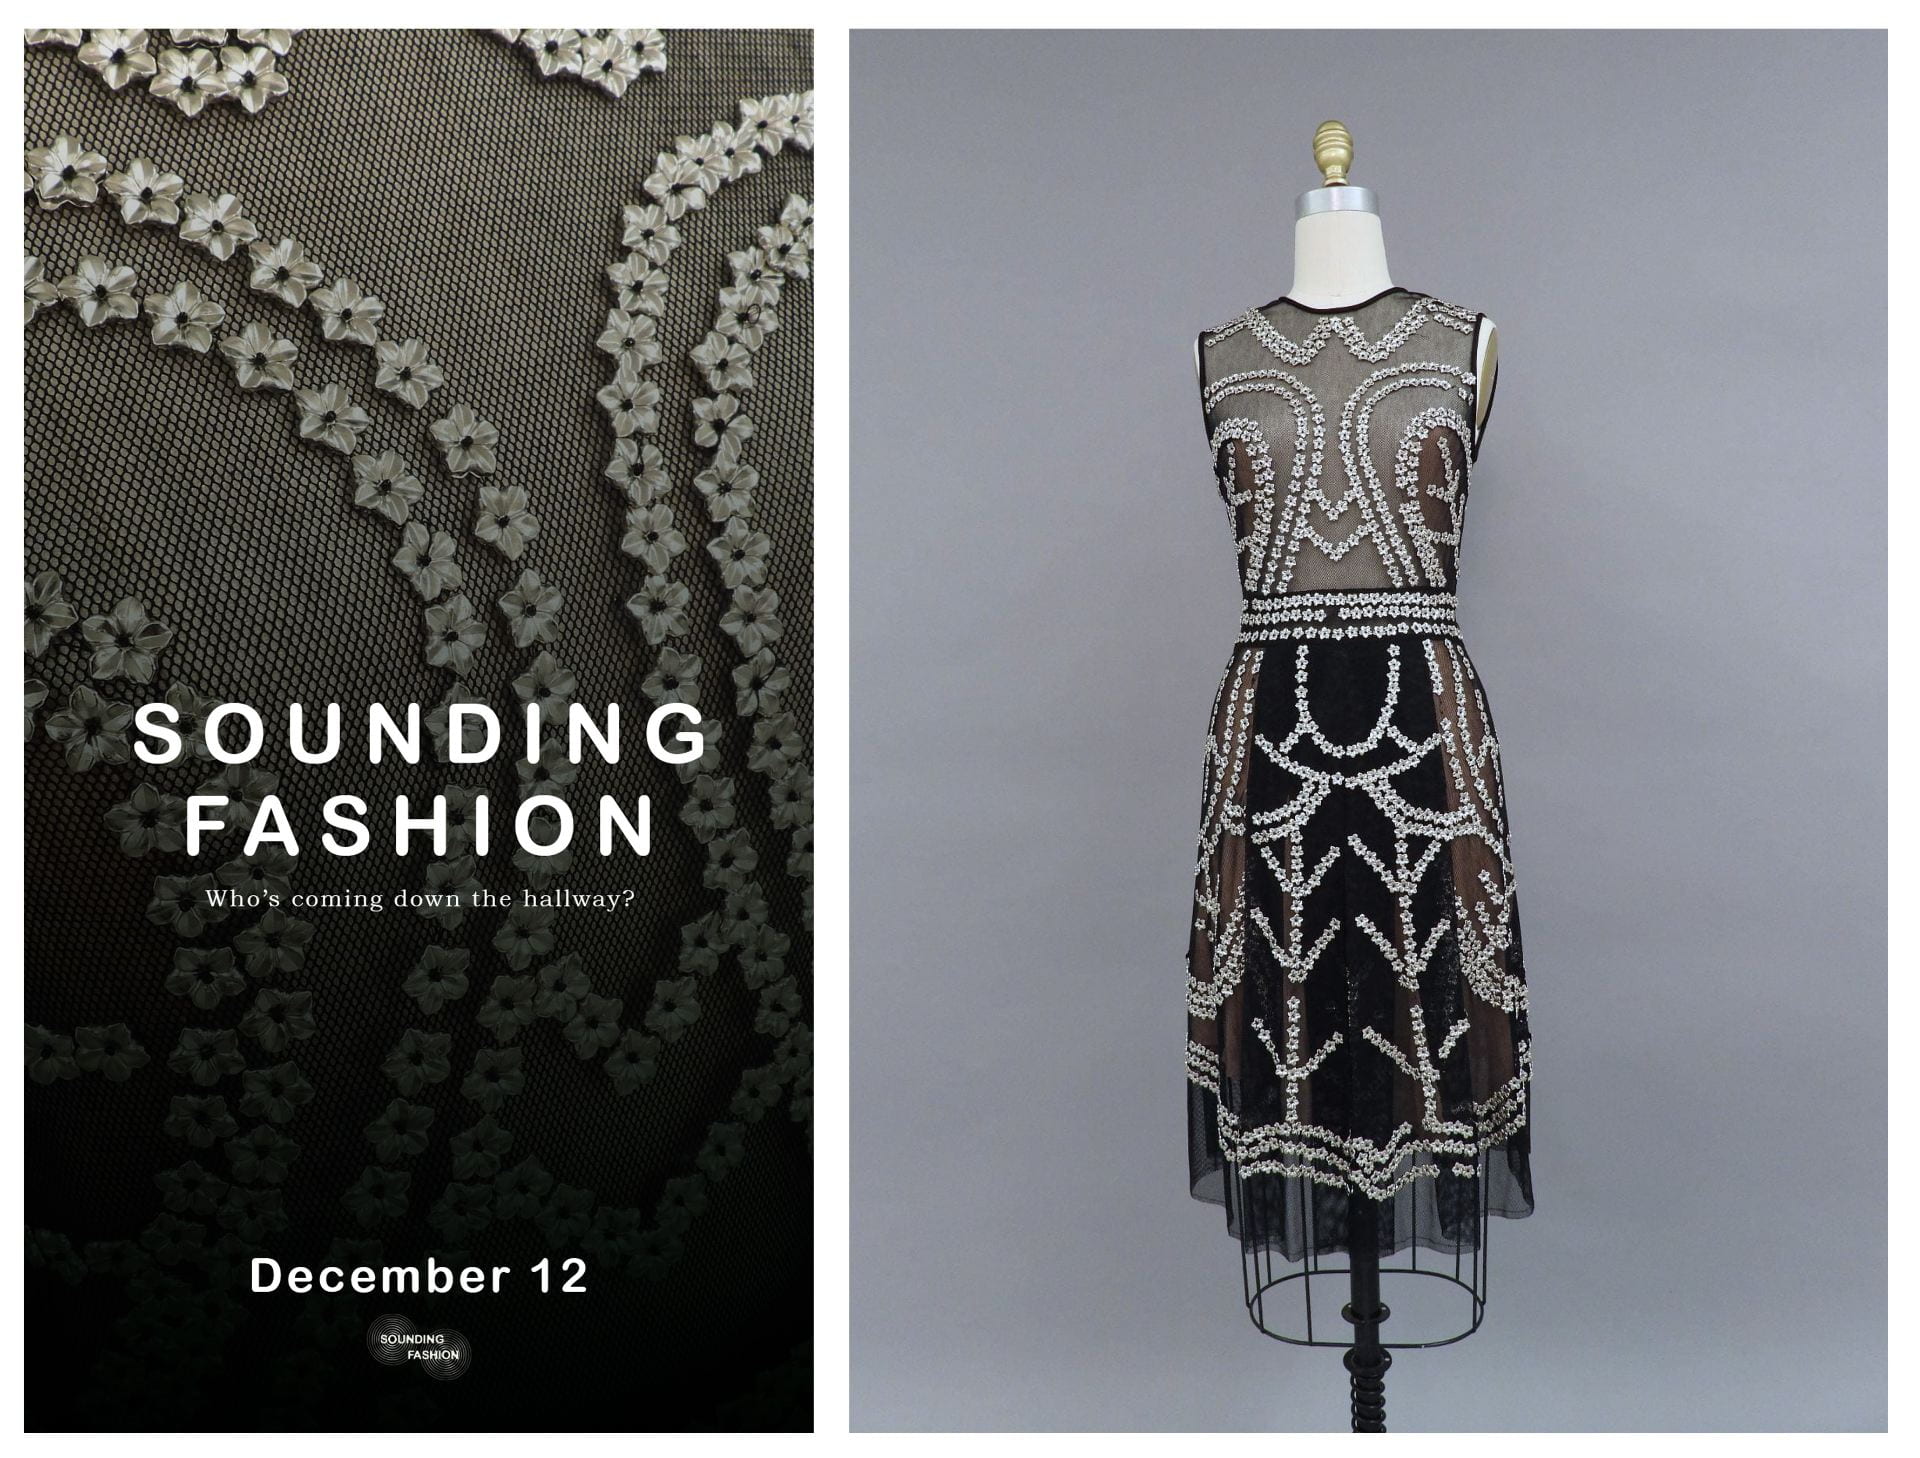 Sounding Fashion exhibit promotional poster and black dress with metal decorative pieces to right